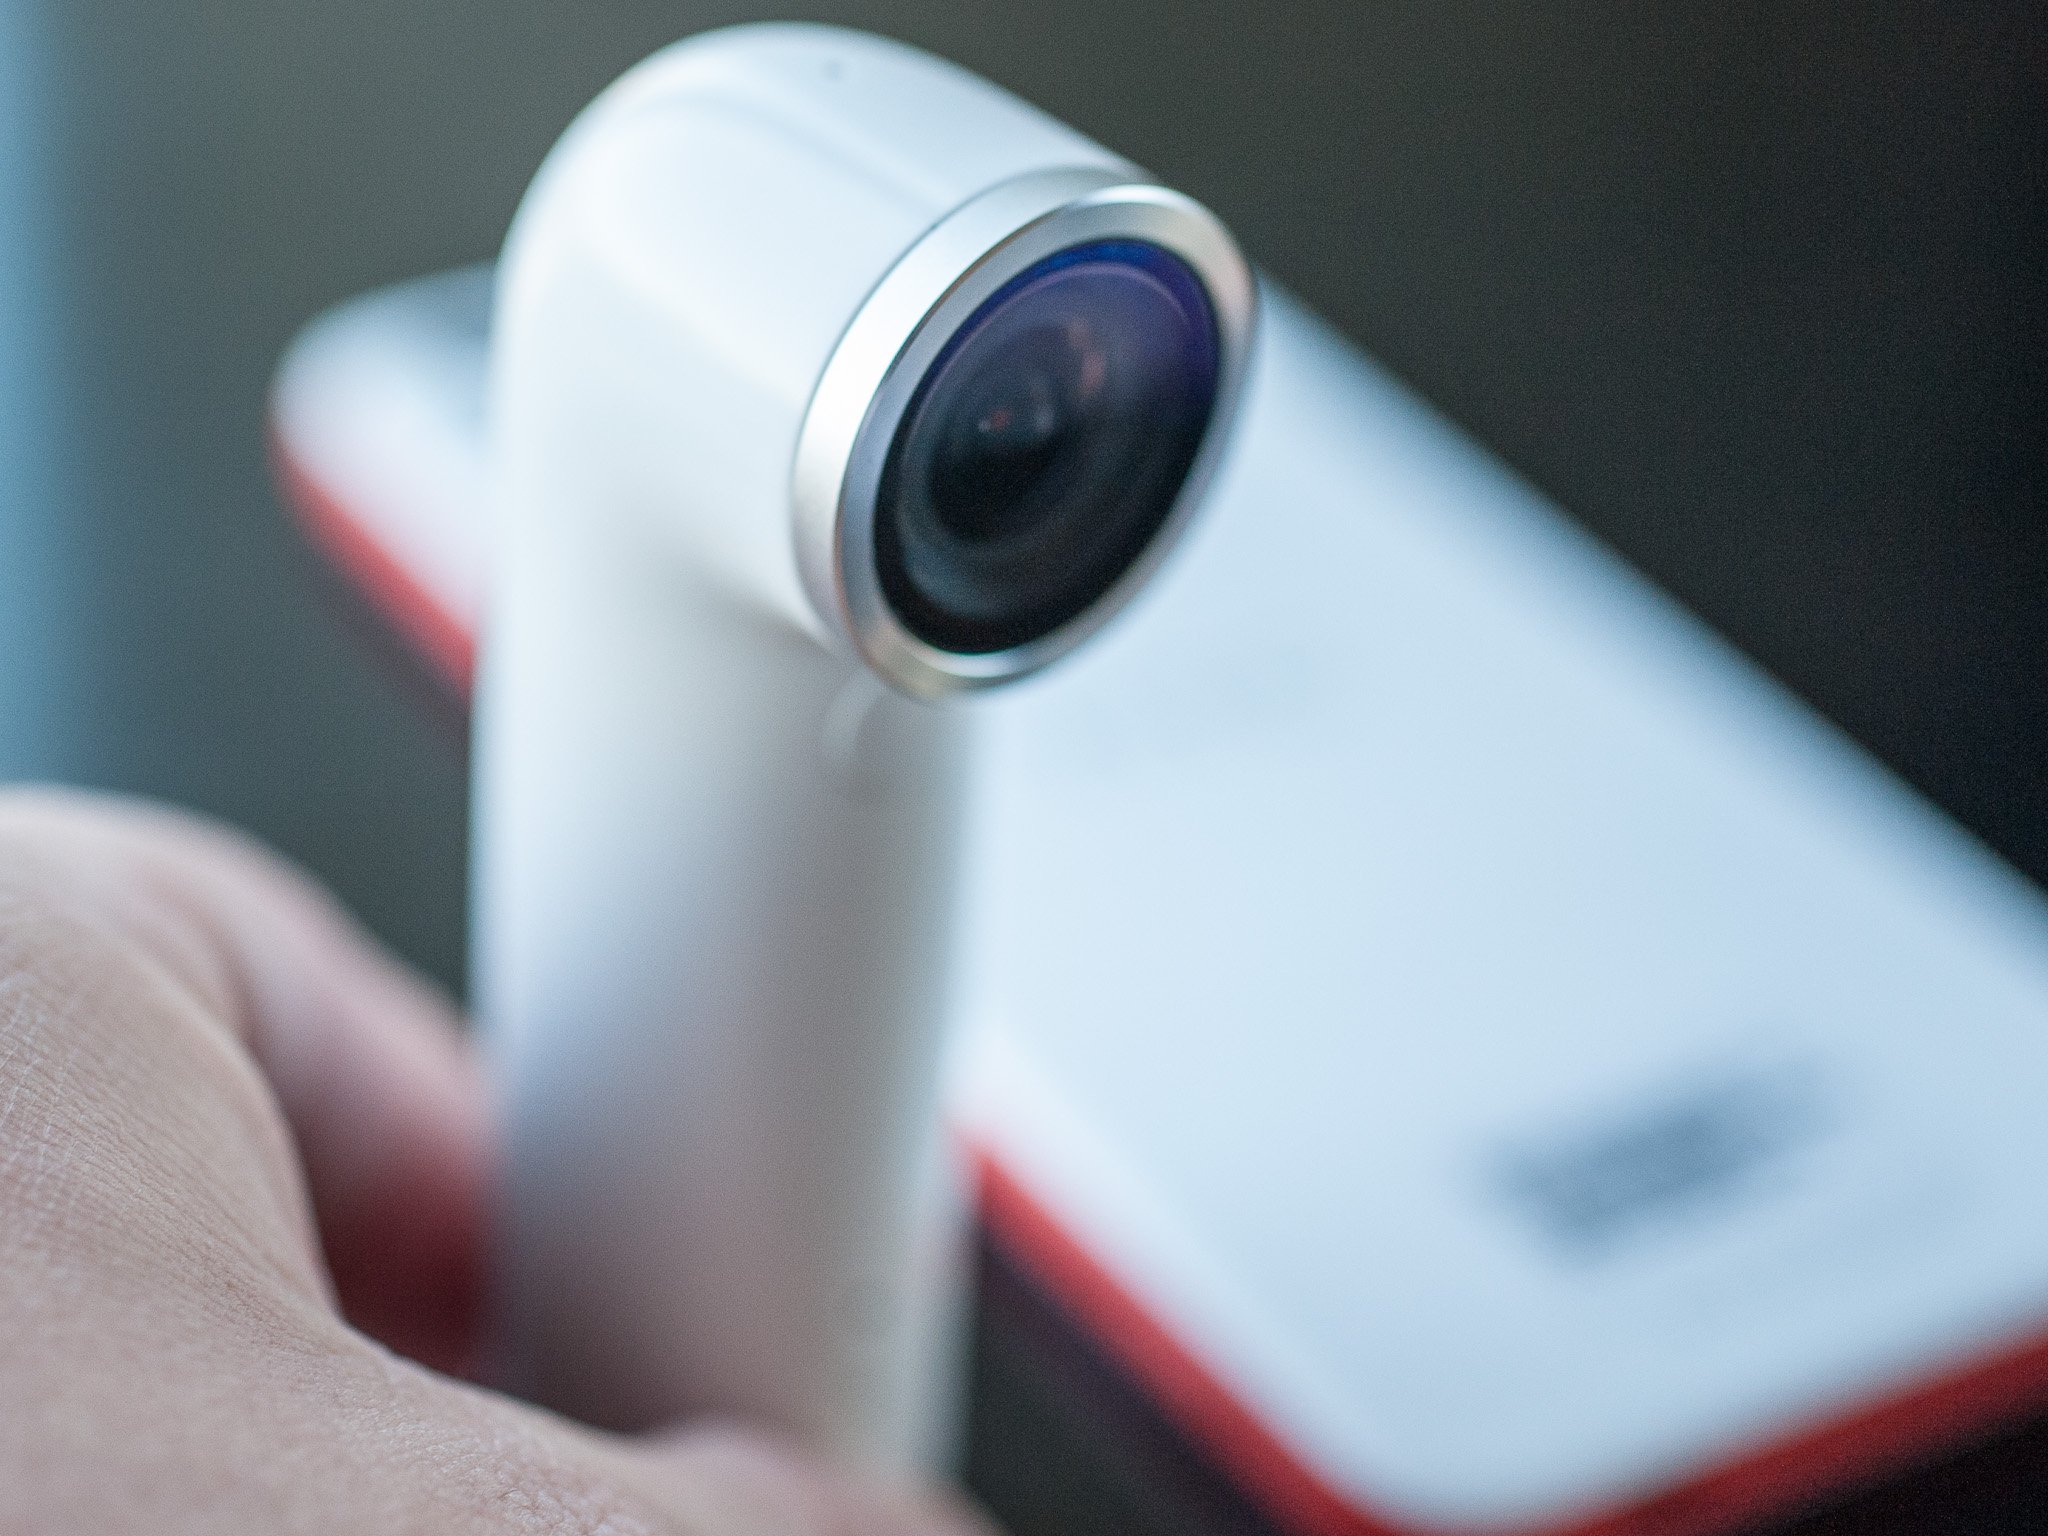 HTC RE camera is on sale at Best Buy for $99